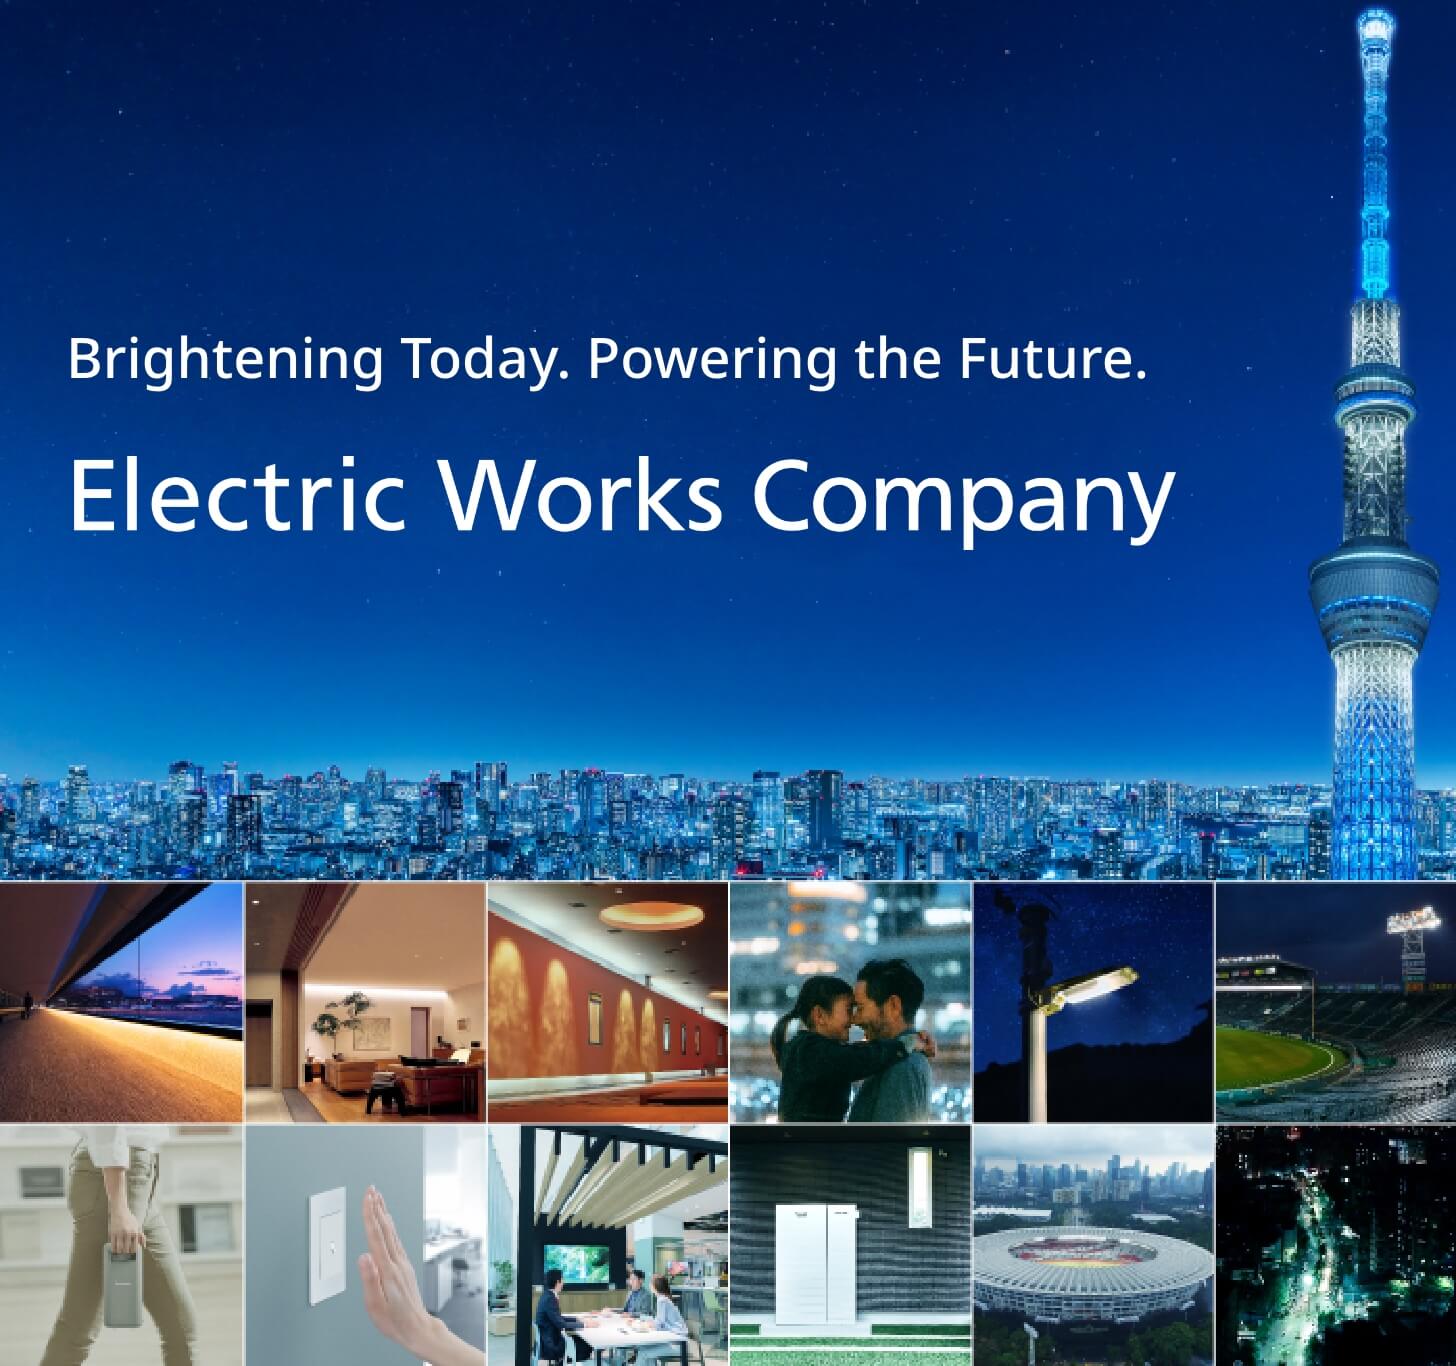 Brightening Today. Powering the Future. Electric Works Company